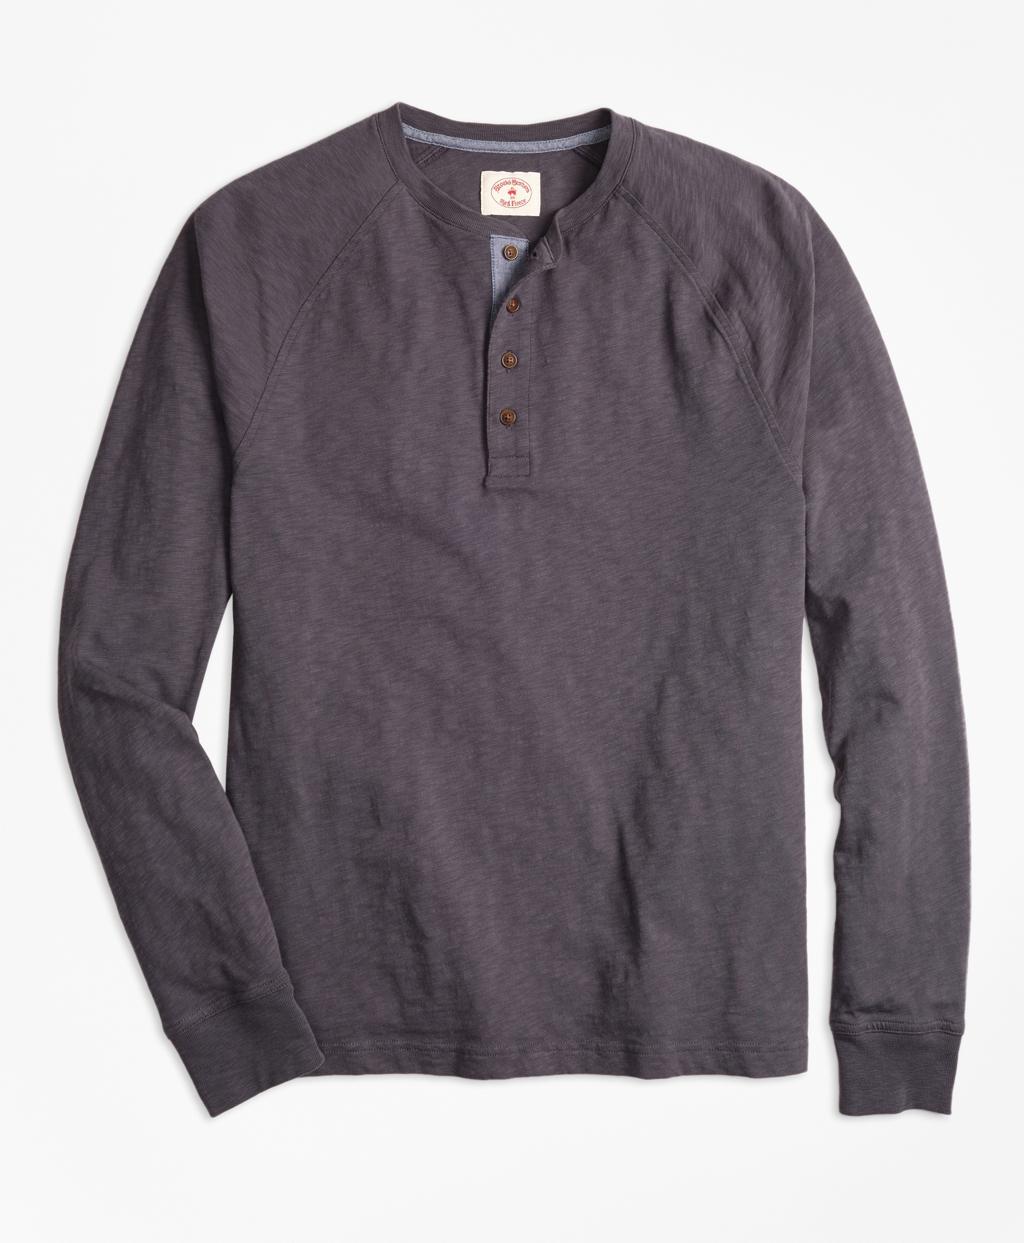 Brooks Brothers Slub Cotton Jersey Henley in Grey (Gray) for Men - Lyst